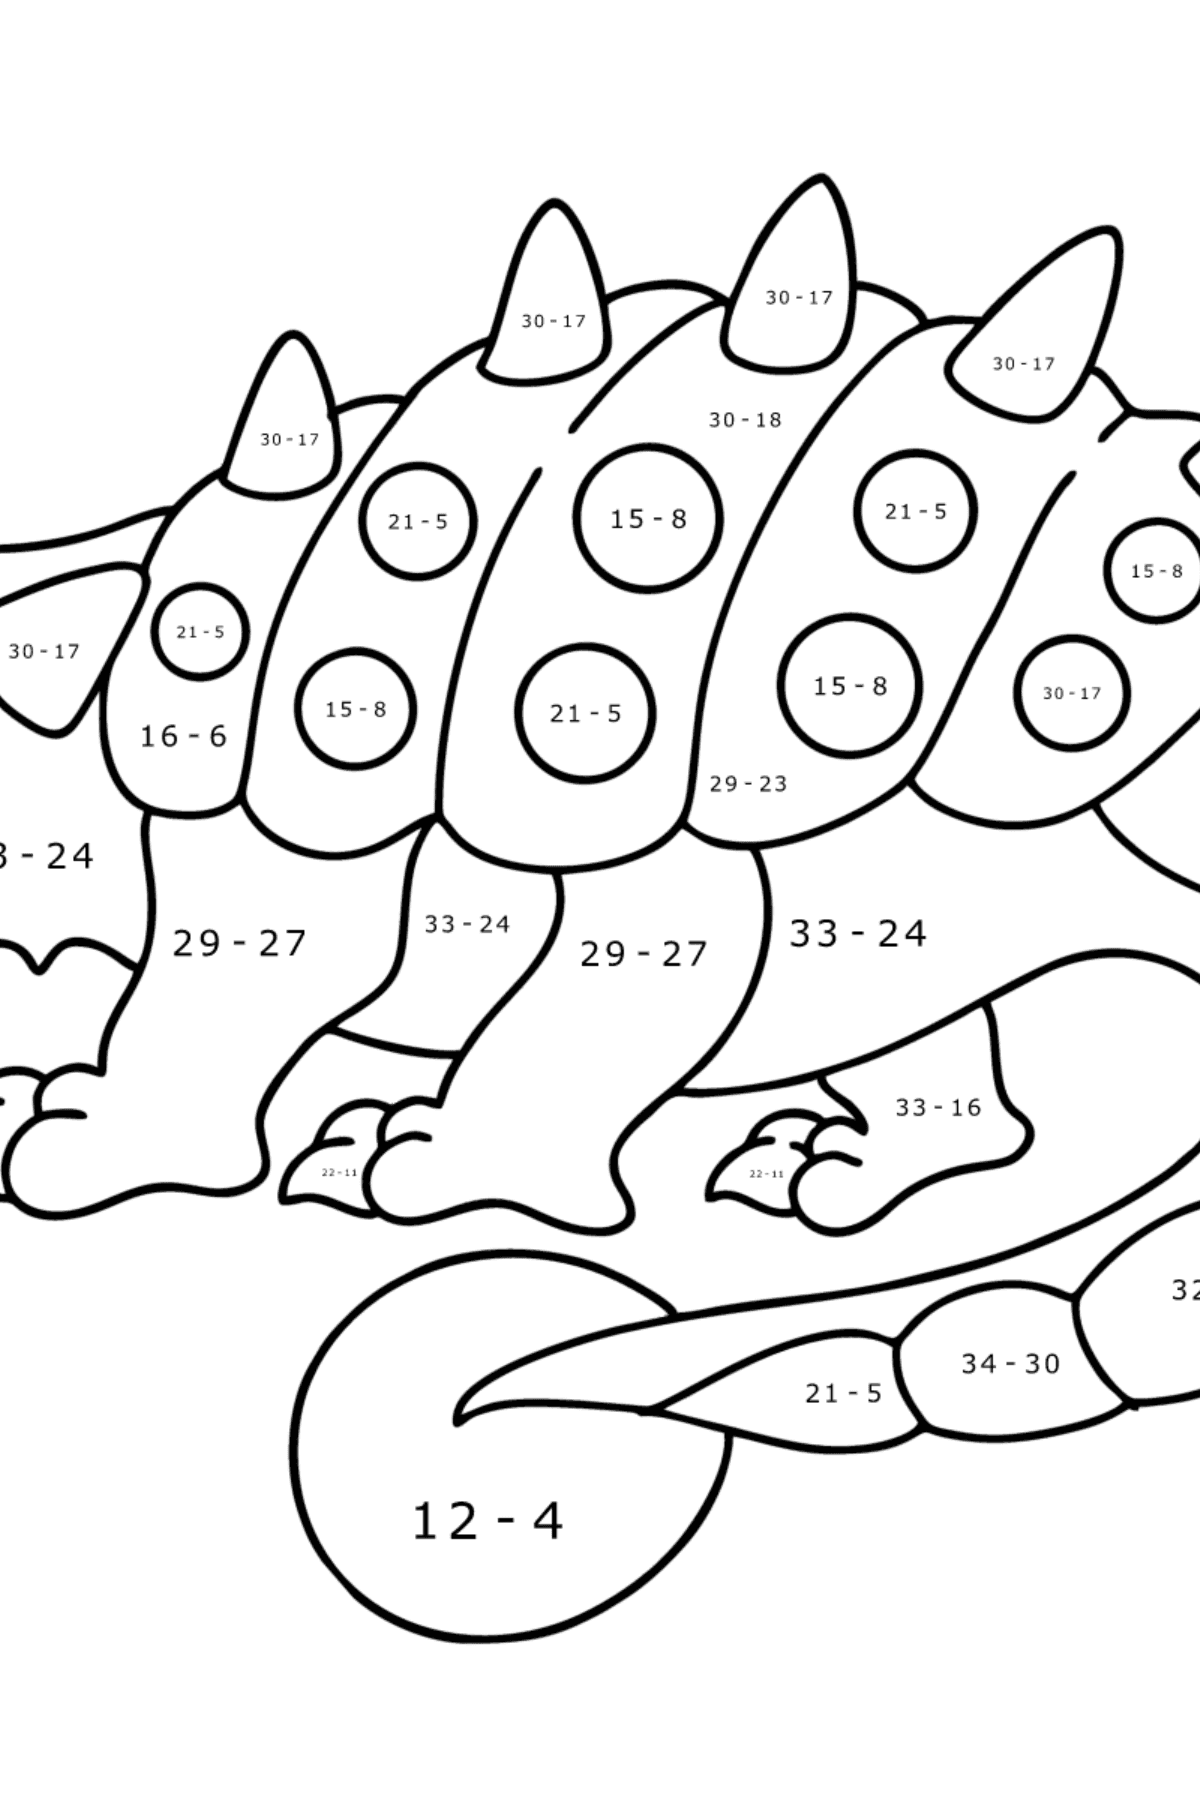 Ankylosaurus coloring page - Math Coloring - Subtraction for Kids